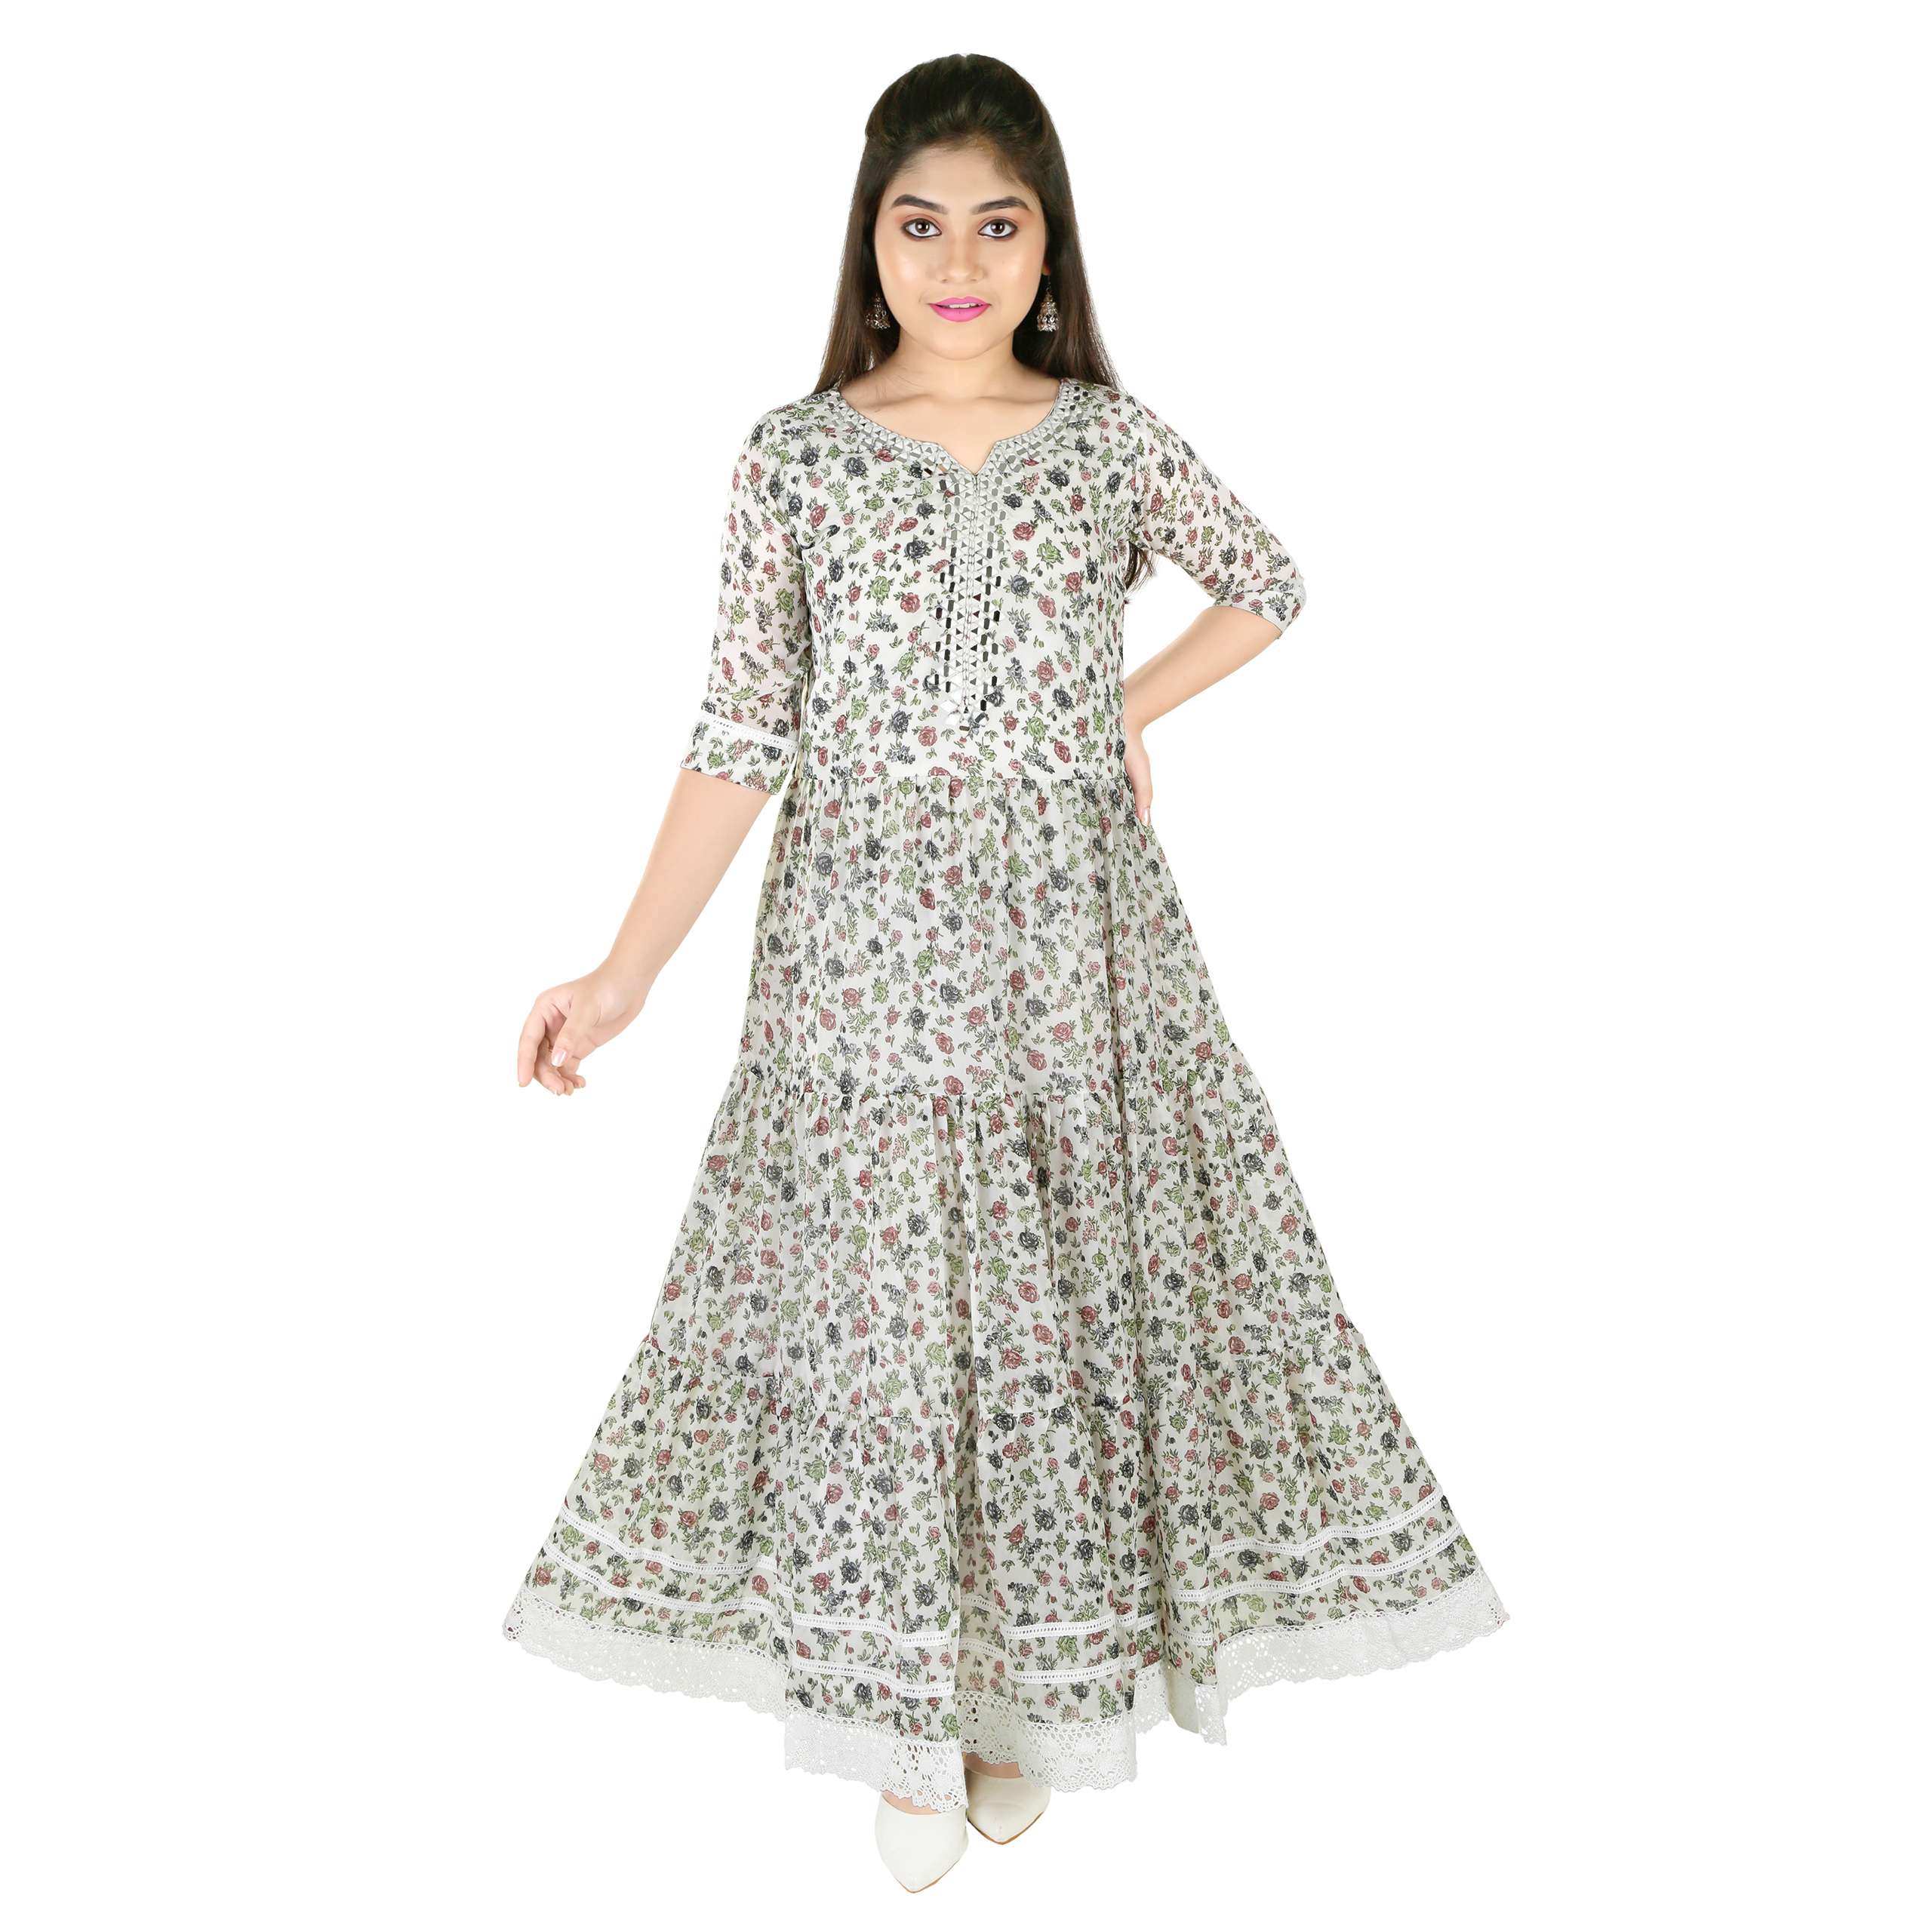 Balaji Emporium Presents Kids Wear Special Designer Indian Party Wear Georgette Print Gown Girlish Dress Collection At Best Price 9009